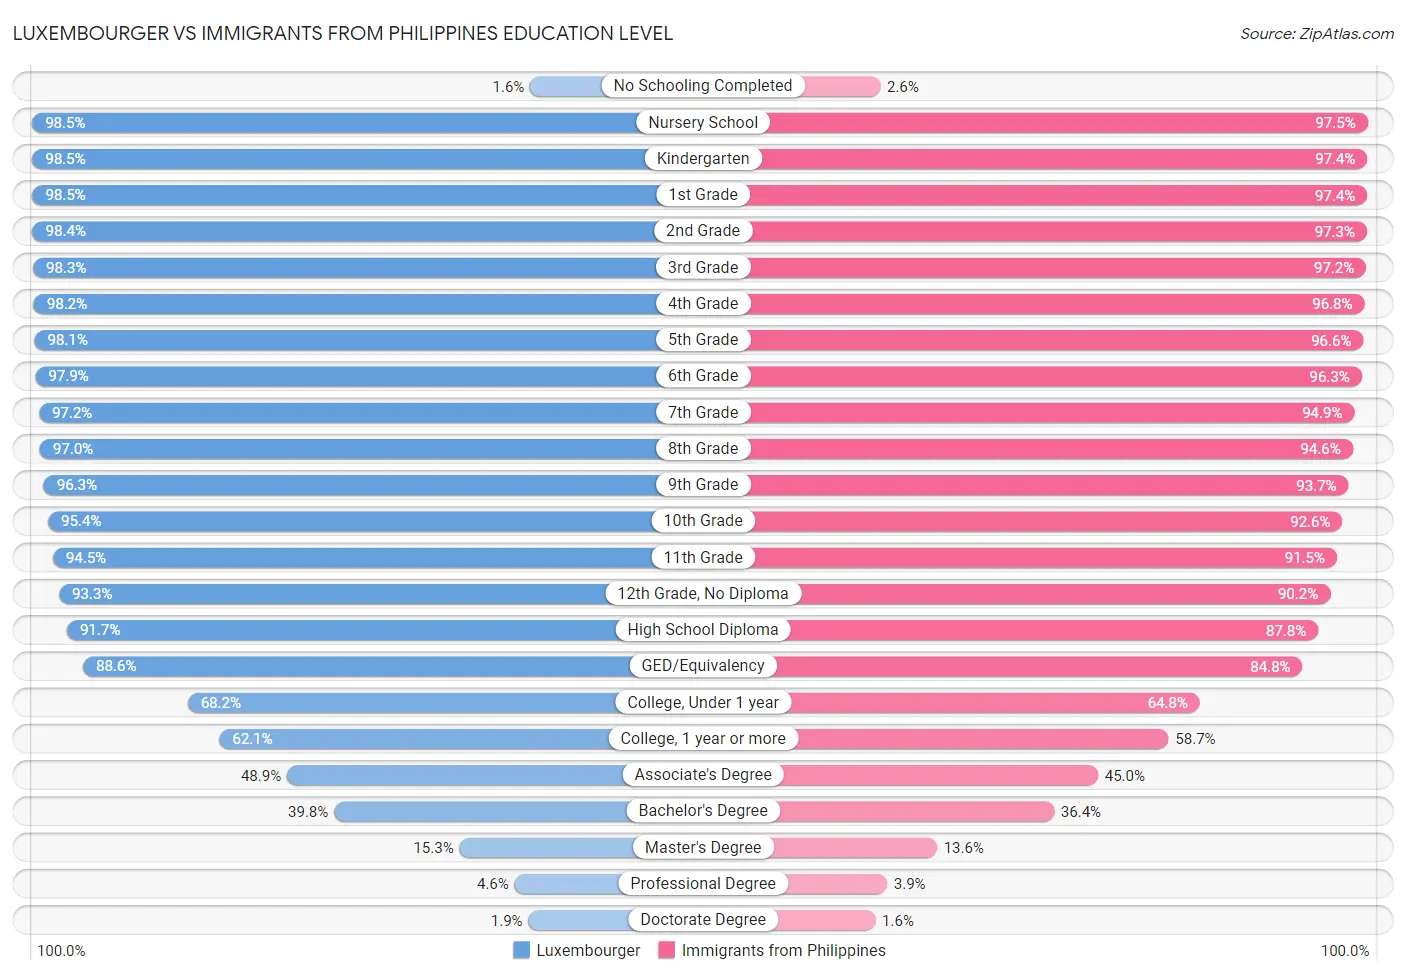 Luxembourger vs Immigrants from Philippines Education Level